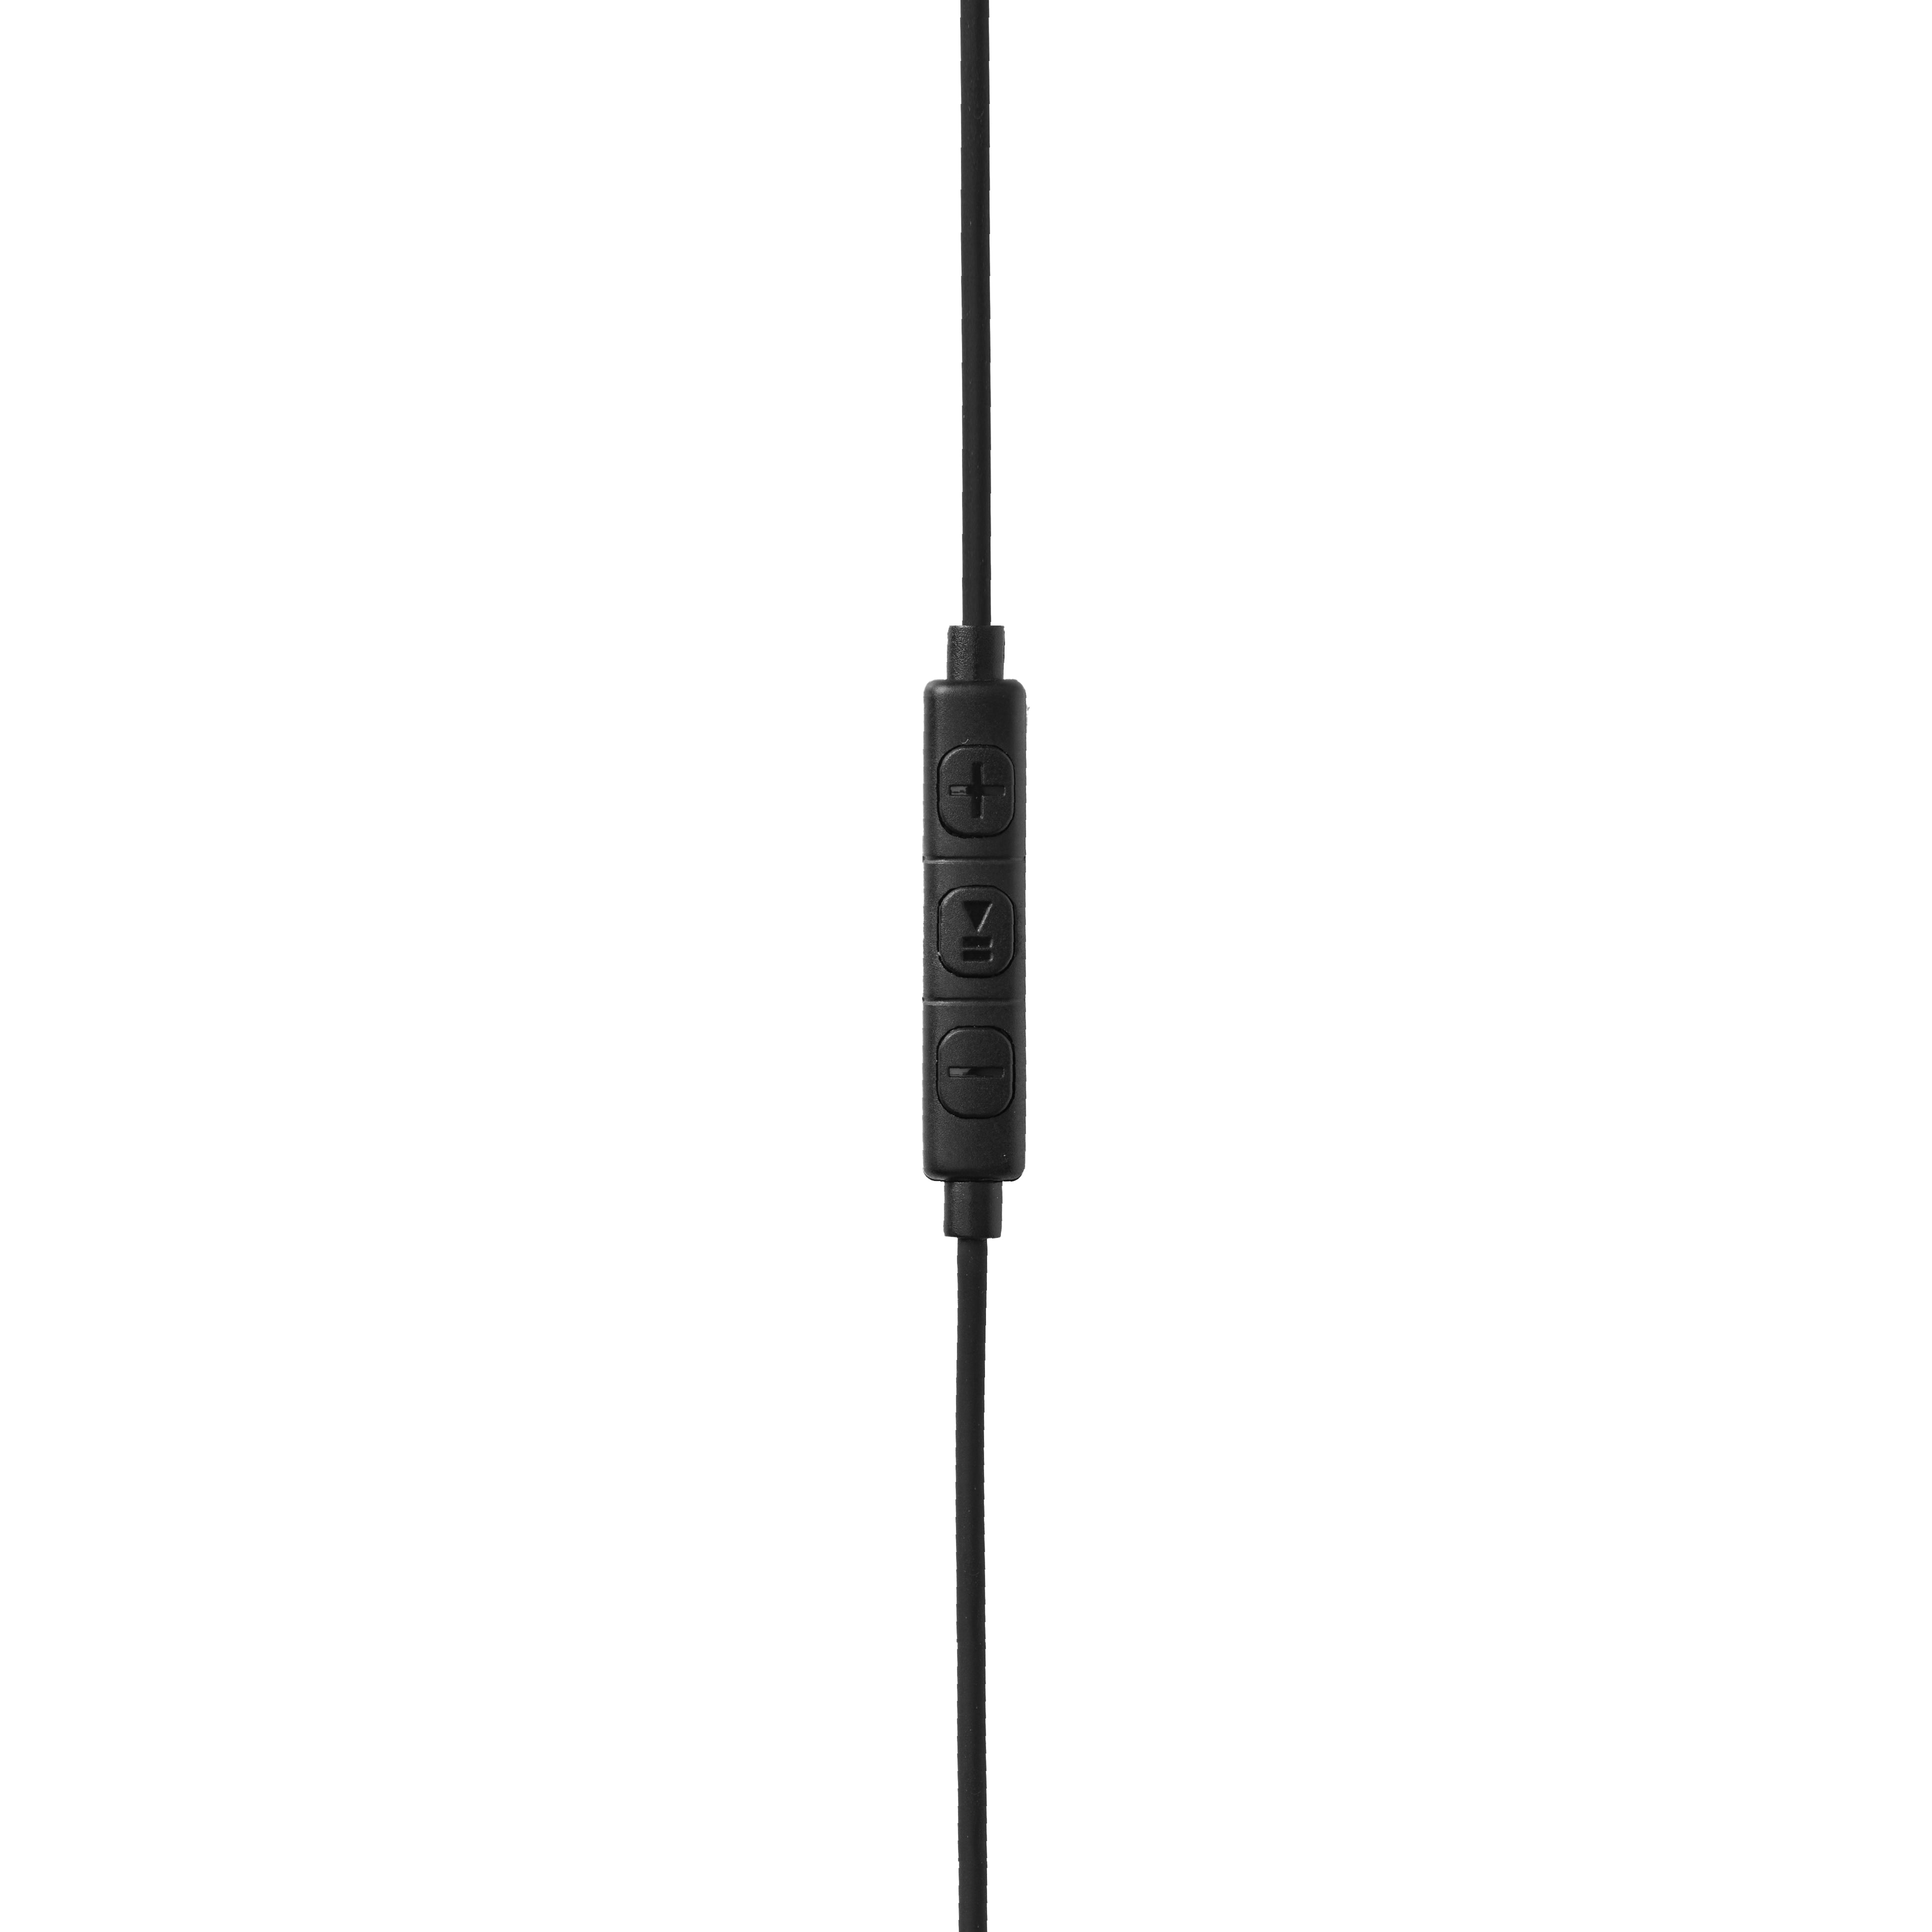 WMH-200 Wired Mono Headset with 3.5mm L shaped connector